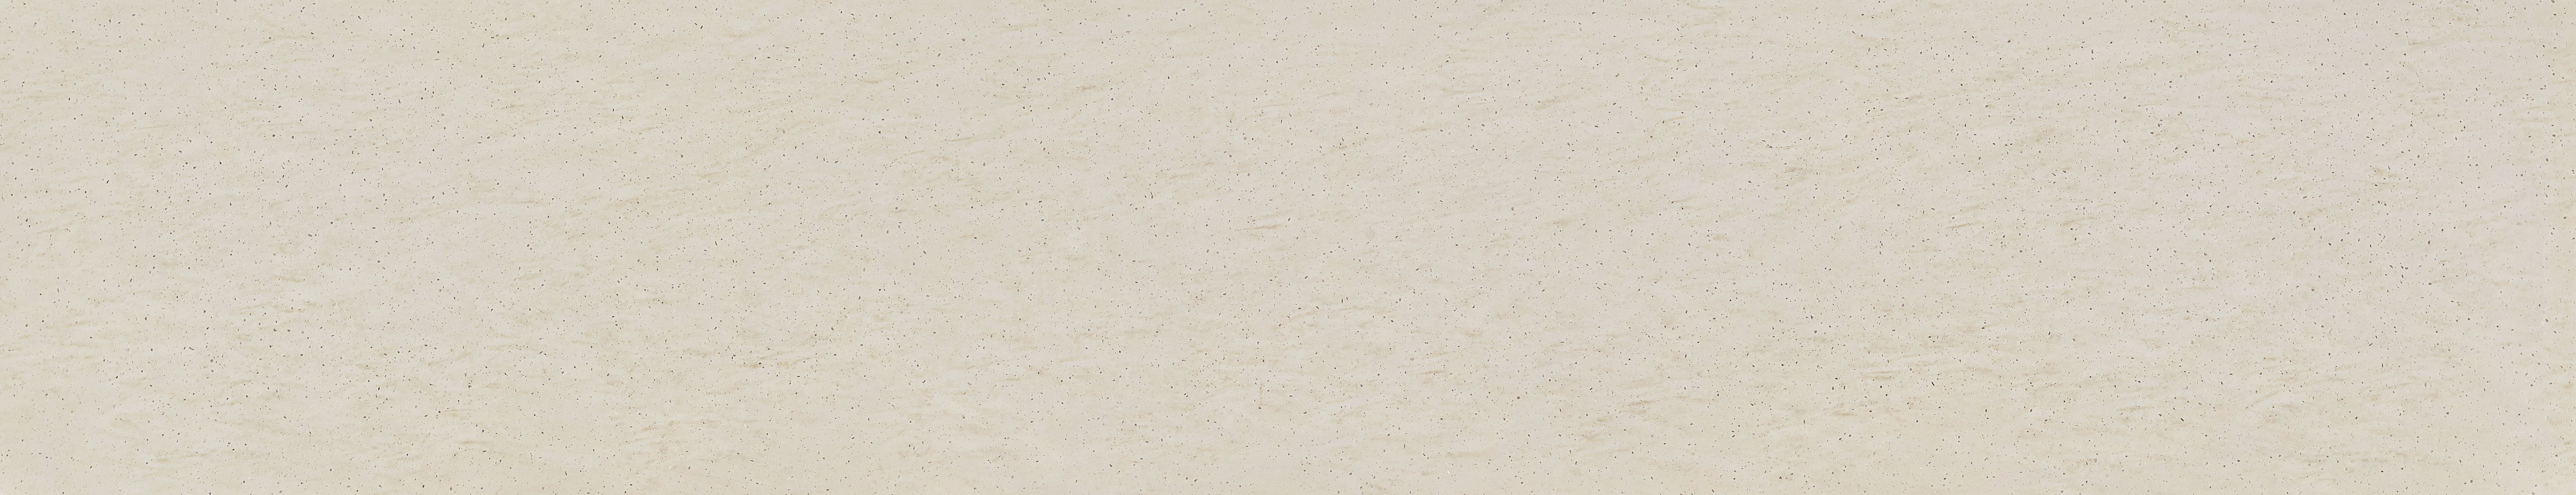 Cascade Beige by Hanex Solid Surface full sheet